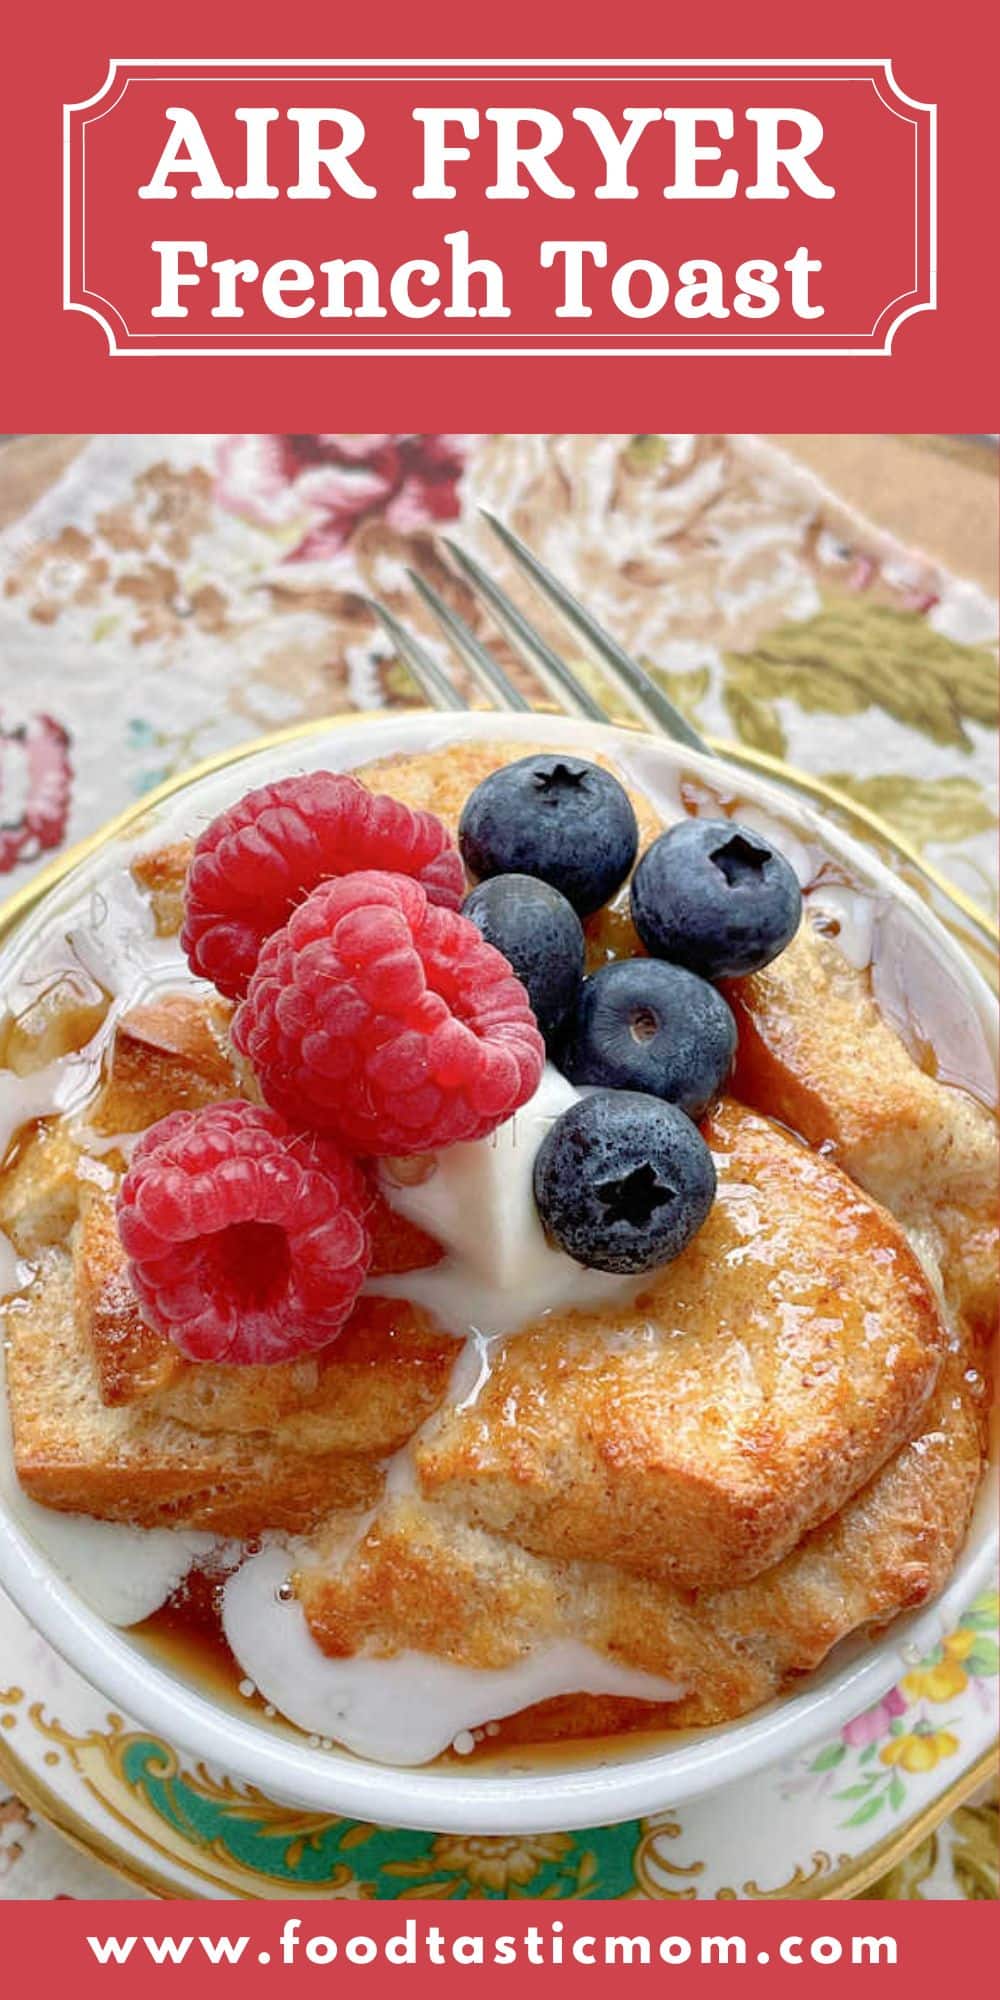 You may never make french toast in a skillet again. This Air Fryer French Toast is a dream breakfast - fast, filling and sinfully delicious. via @foodtasticmom